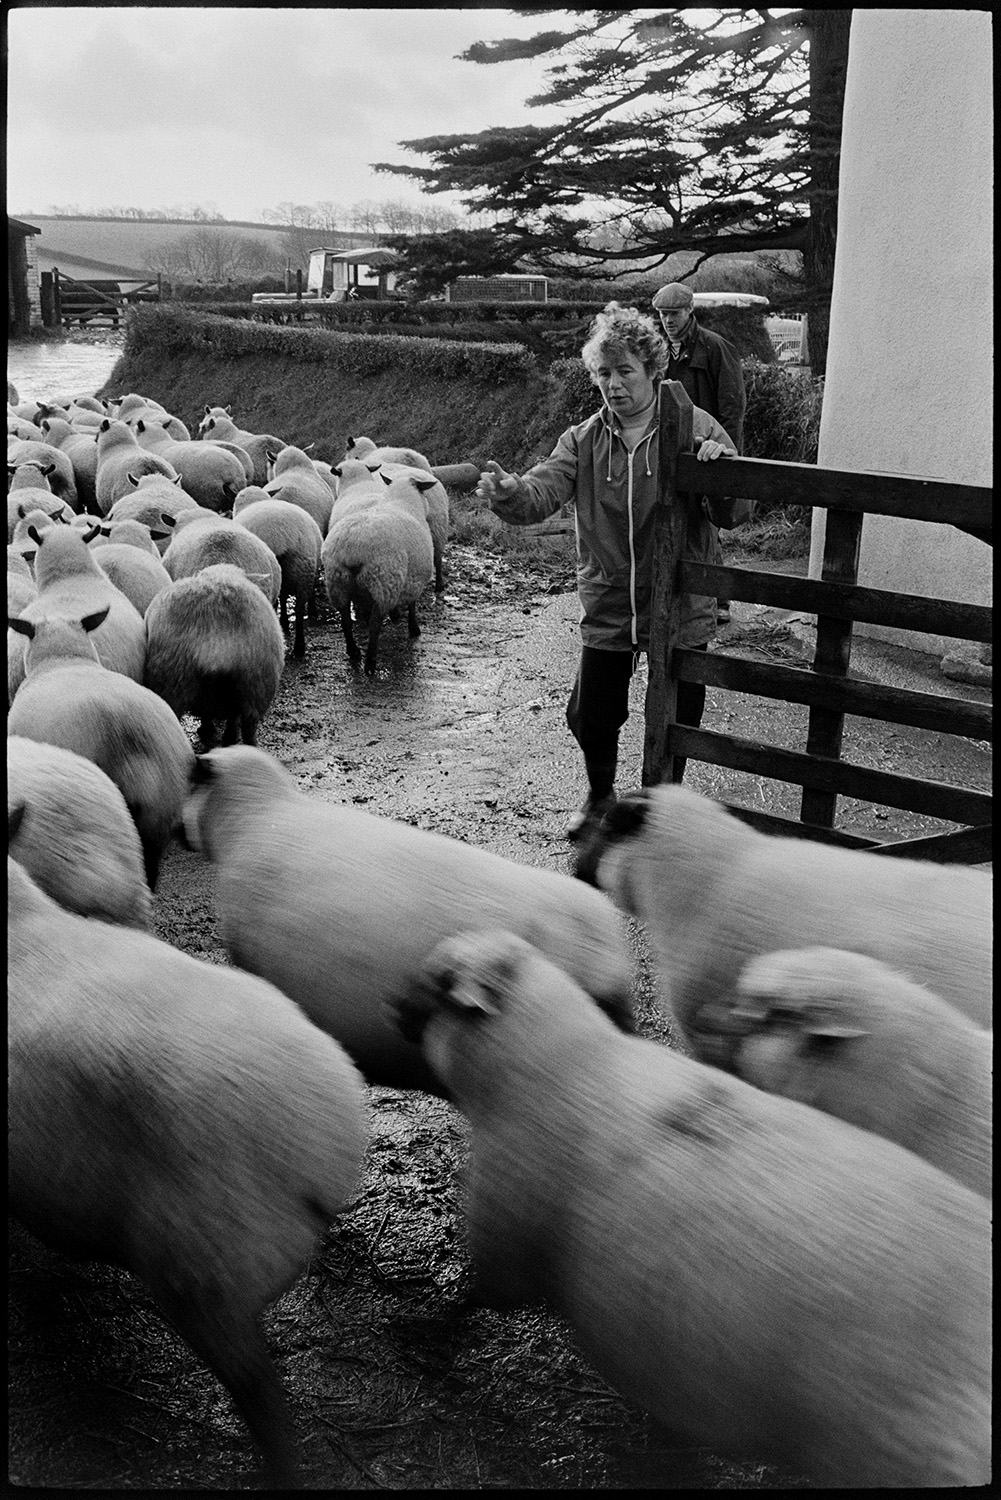 Woman farmer counting sheep flock going down lane to pasture. 
[Mrs Elworthy counting sheep as they pass through an open gateway at Narracott, Hollocombe, on their way to new pasture down a lane.]